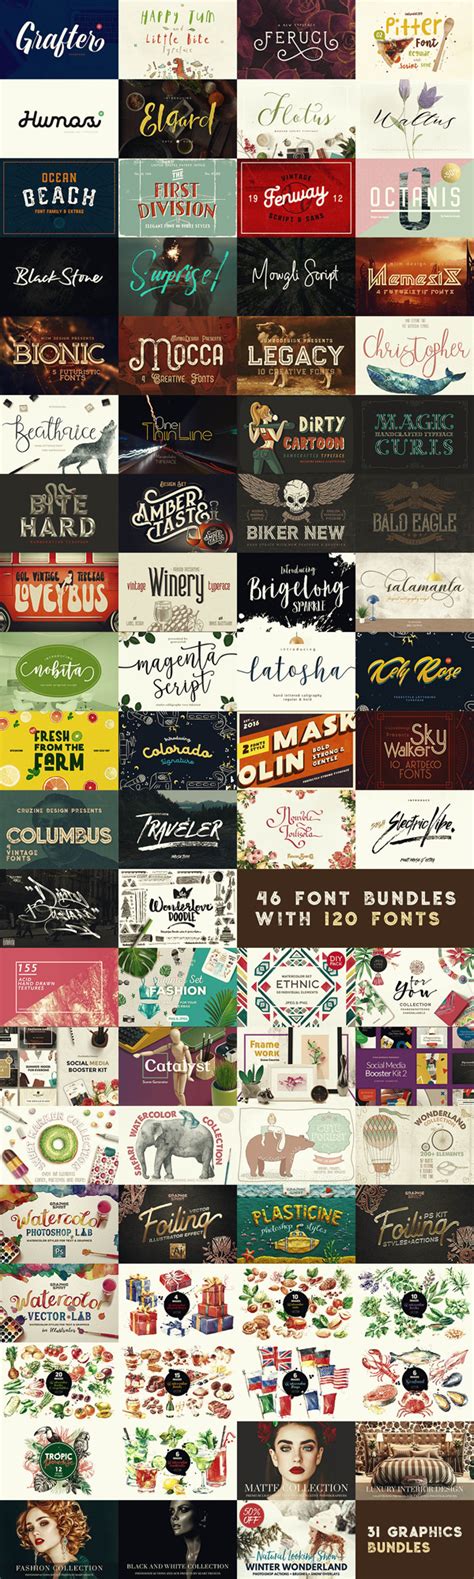 Check spelling or type a new query. Best Sellers Mega Bundle (Fonts & Graphics) with Discount ...